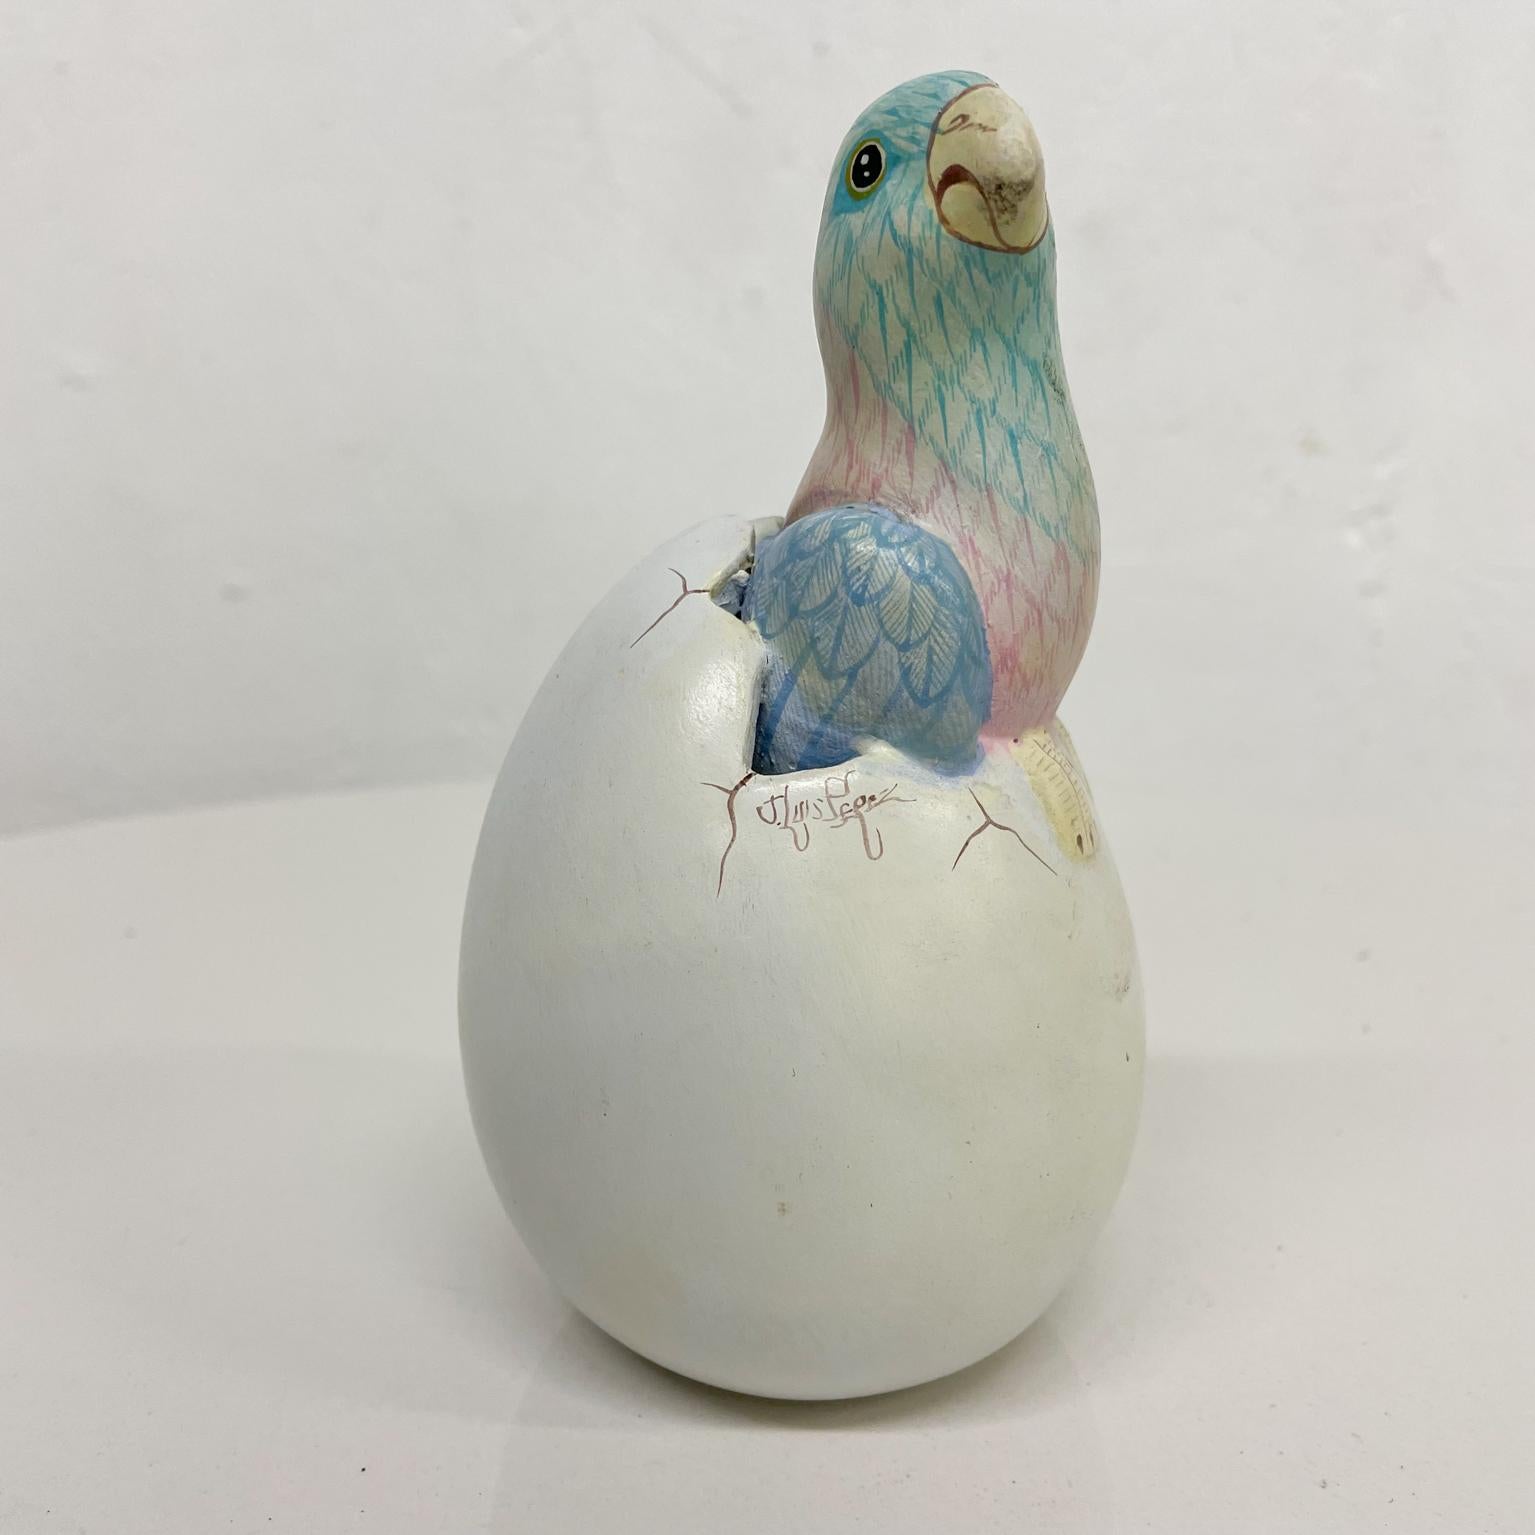 Bird
Pretty Parrot Egg Hatching Ceramic Art Pottery Mexico Style of Sergio Bustamante 1980s
Ceramic Folk Art sculpture from Mexico
In the style of Sergio Bustamante signed J Luis Perez
5.63 tall x 3.25 diameter
Preowned vintage unrestored